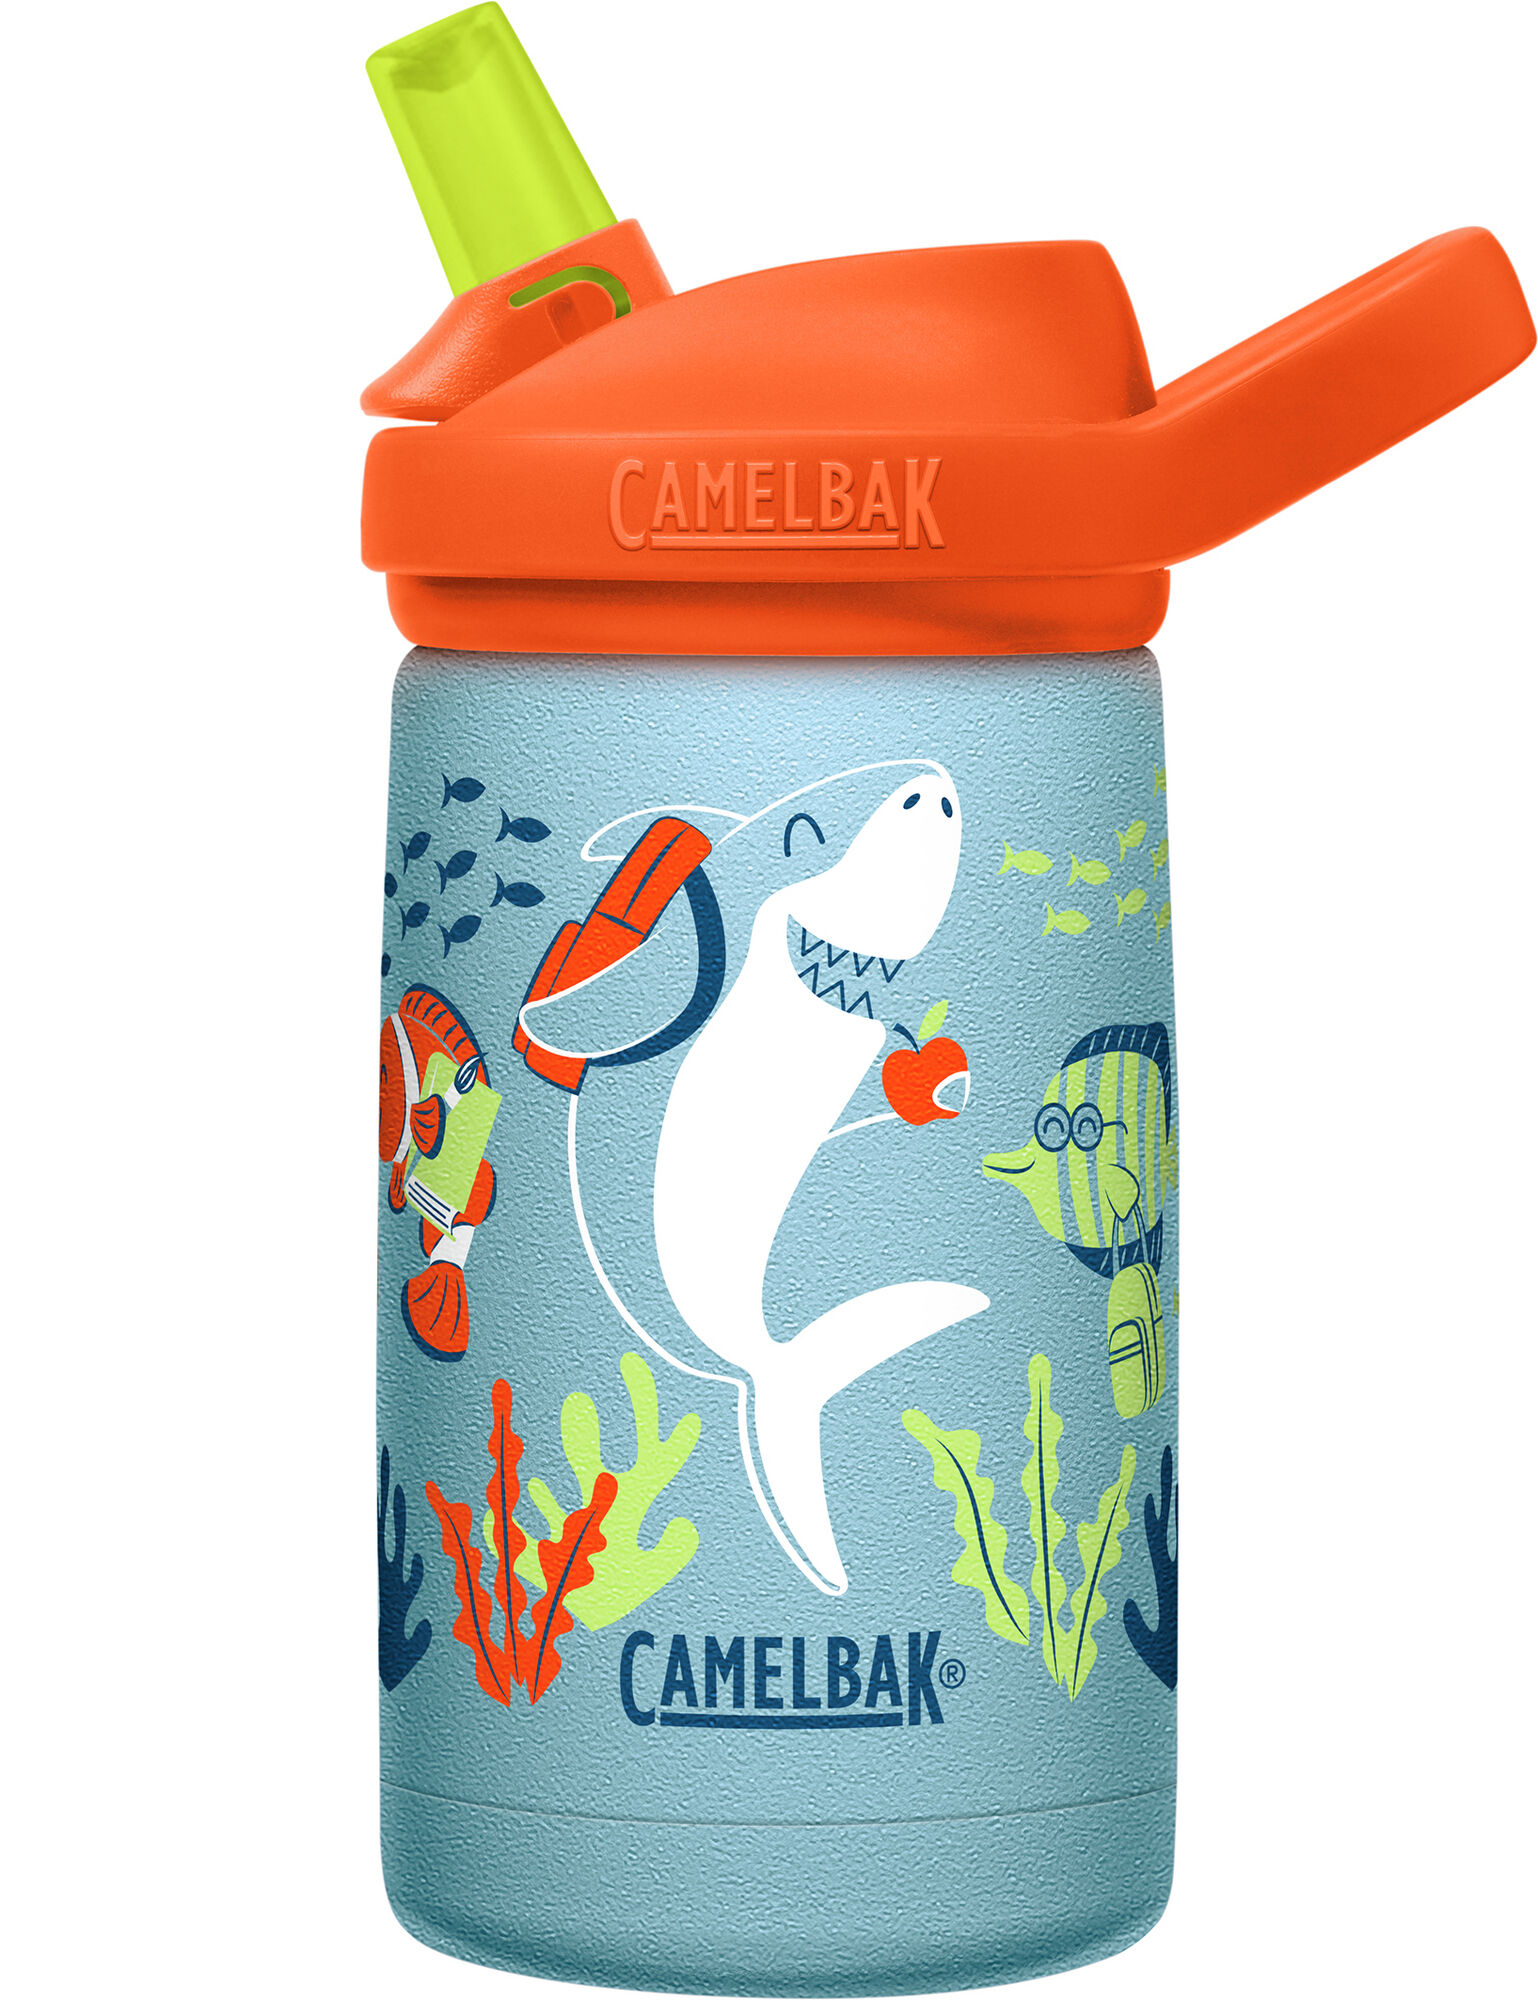 https://op1.0ps.us/original/opplanet-camelbak-eddy-stainless-vacuum-insulated-water-bottle-school-of-fish-12-oz-2752401035-main